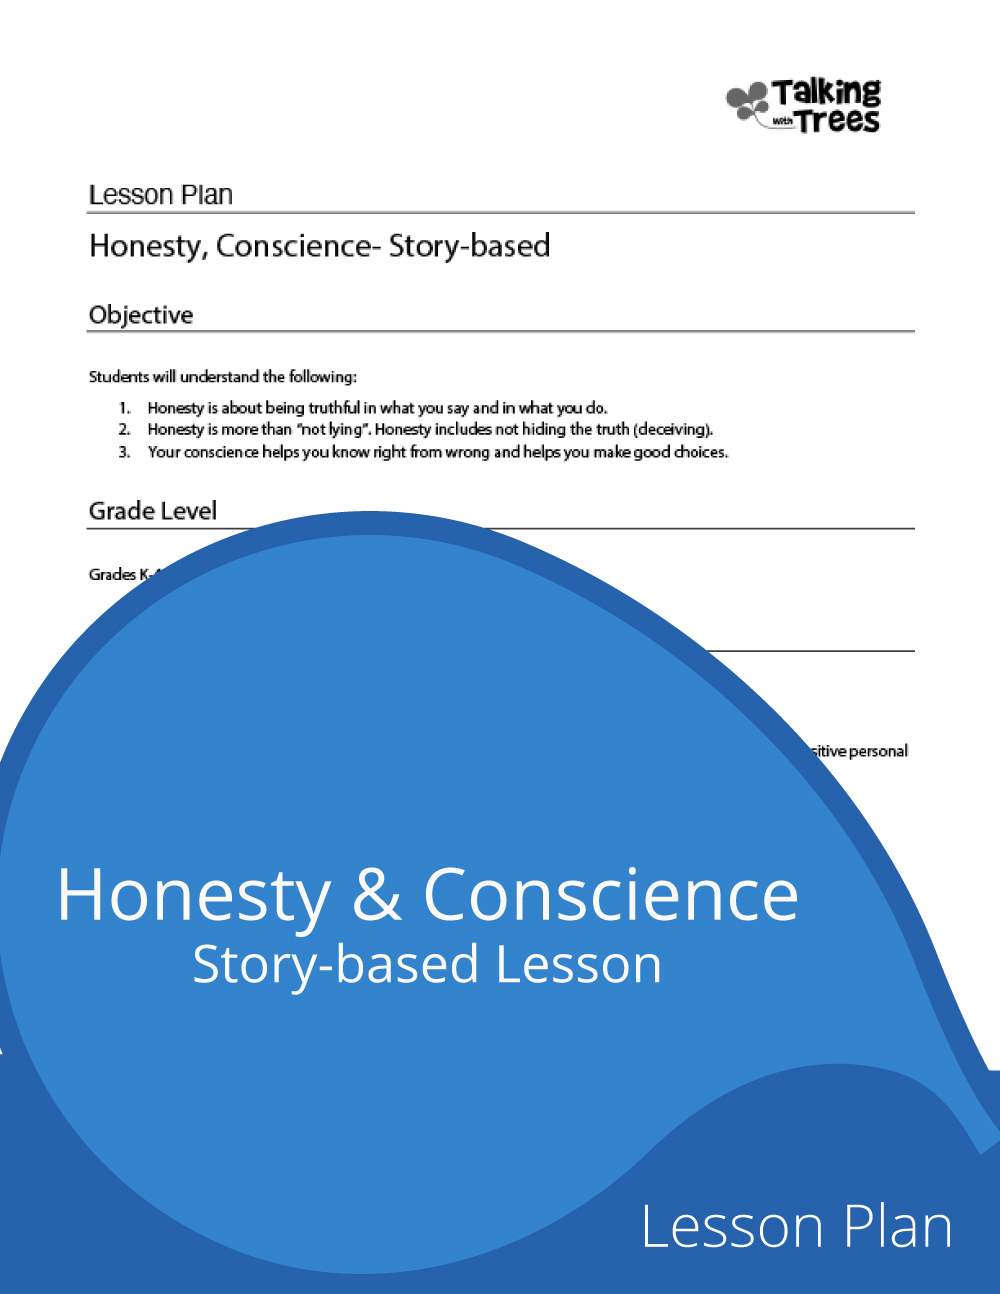 Honesty & Conscience lesson plan for elementary social emotional learning